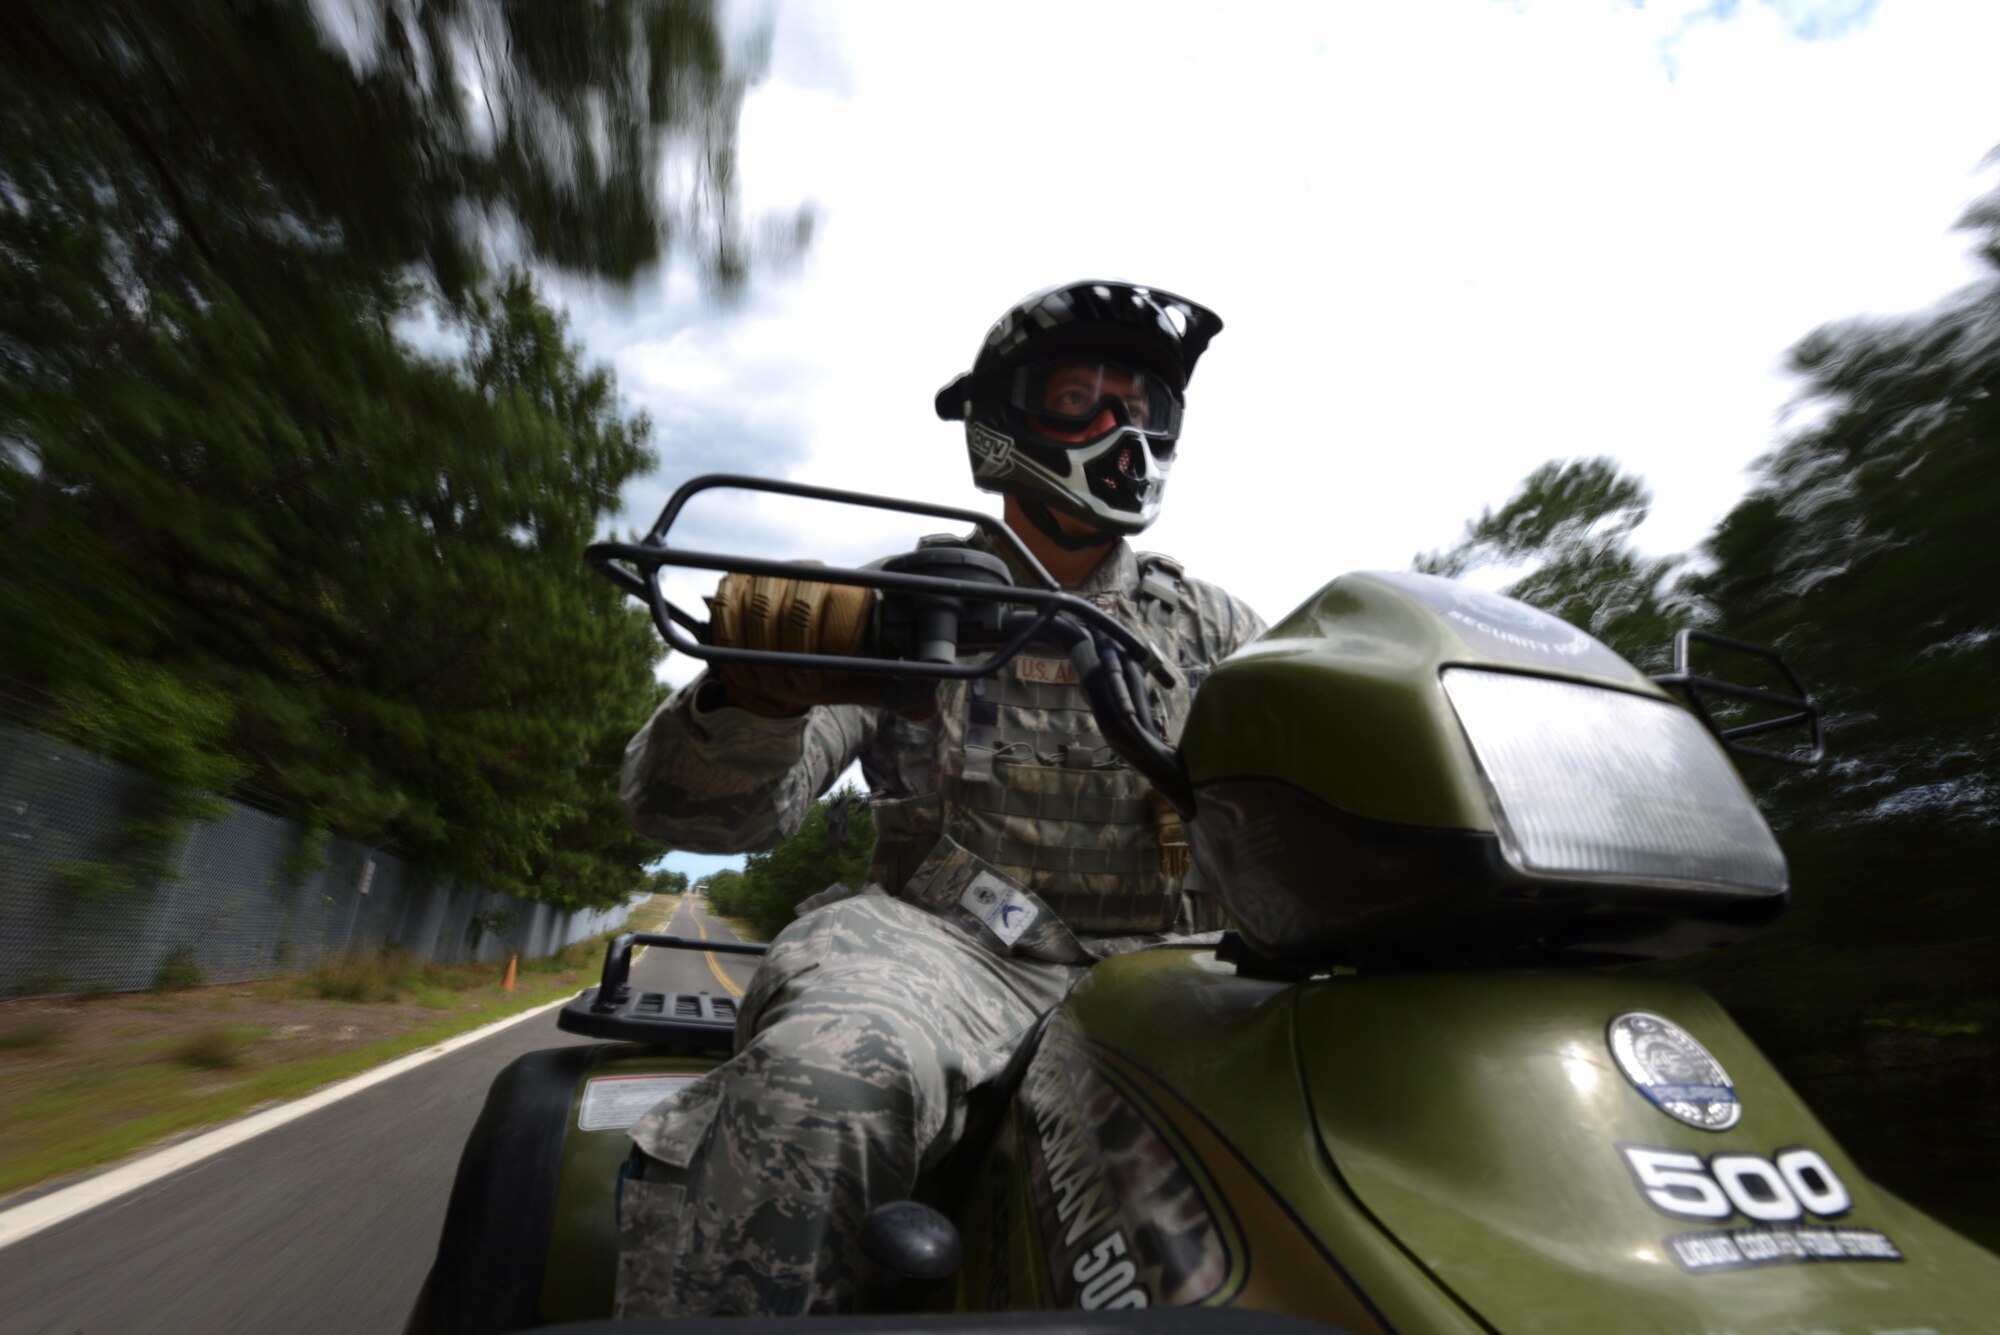 Master Sgt. Paul W. Clementi, a member of the 106th Security Forces Squadron, trains on an all-terrain vehicle at Francis S. Gabreski Air National Guard Base, N.Y., Aug. 18, 2016. ATVs are used by security forces to maintain the integrity of the base perimeter. Members must regularly train in order to retain their proficiency. (U.S. Air National Guard photo/Staff Sgt. Christopher S. Muncy)